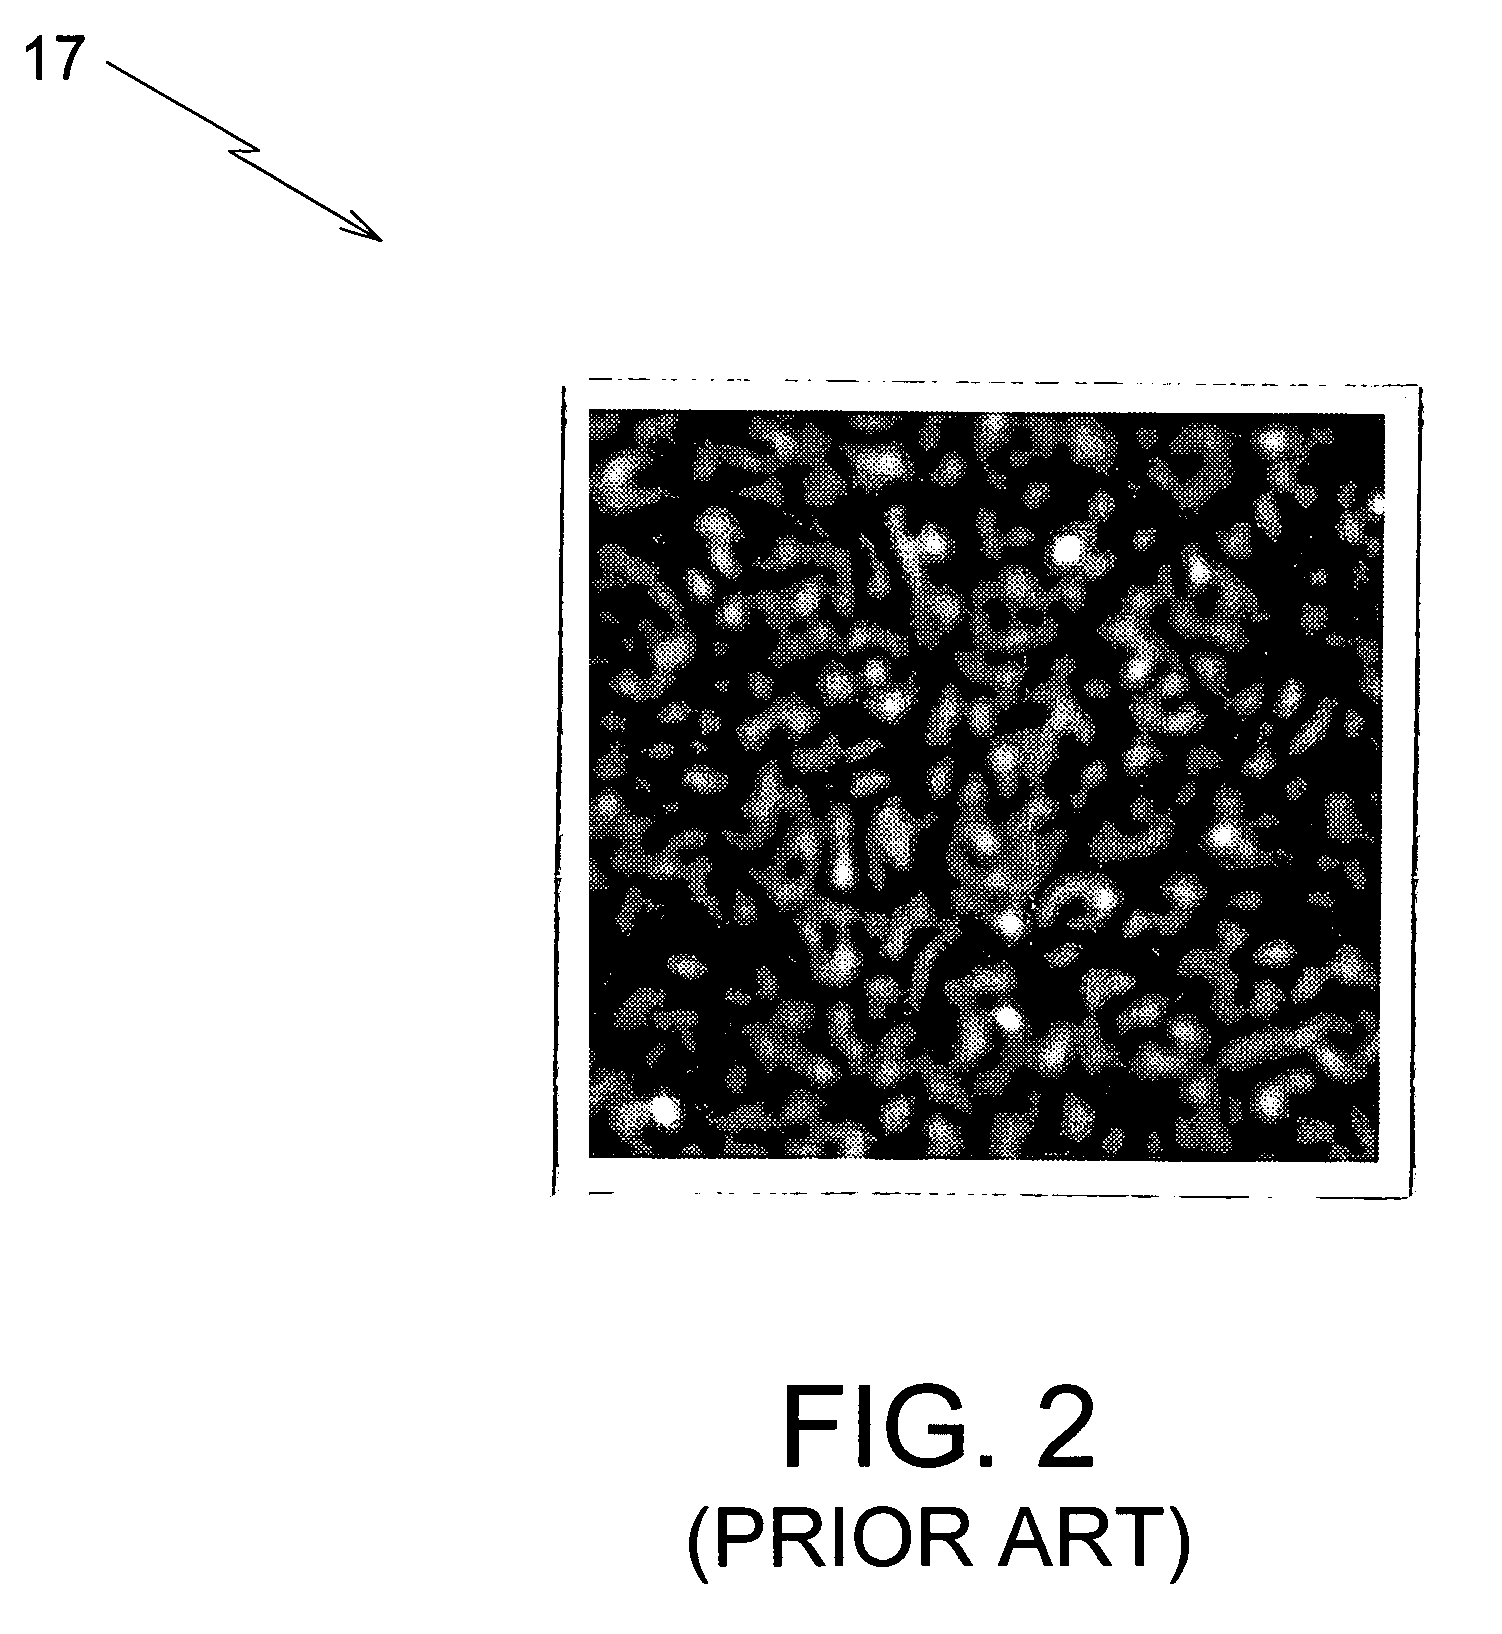 Method and apparatus for reducing laser speckle using polarization averaging